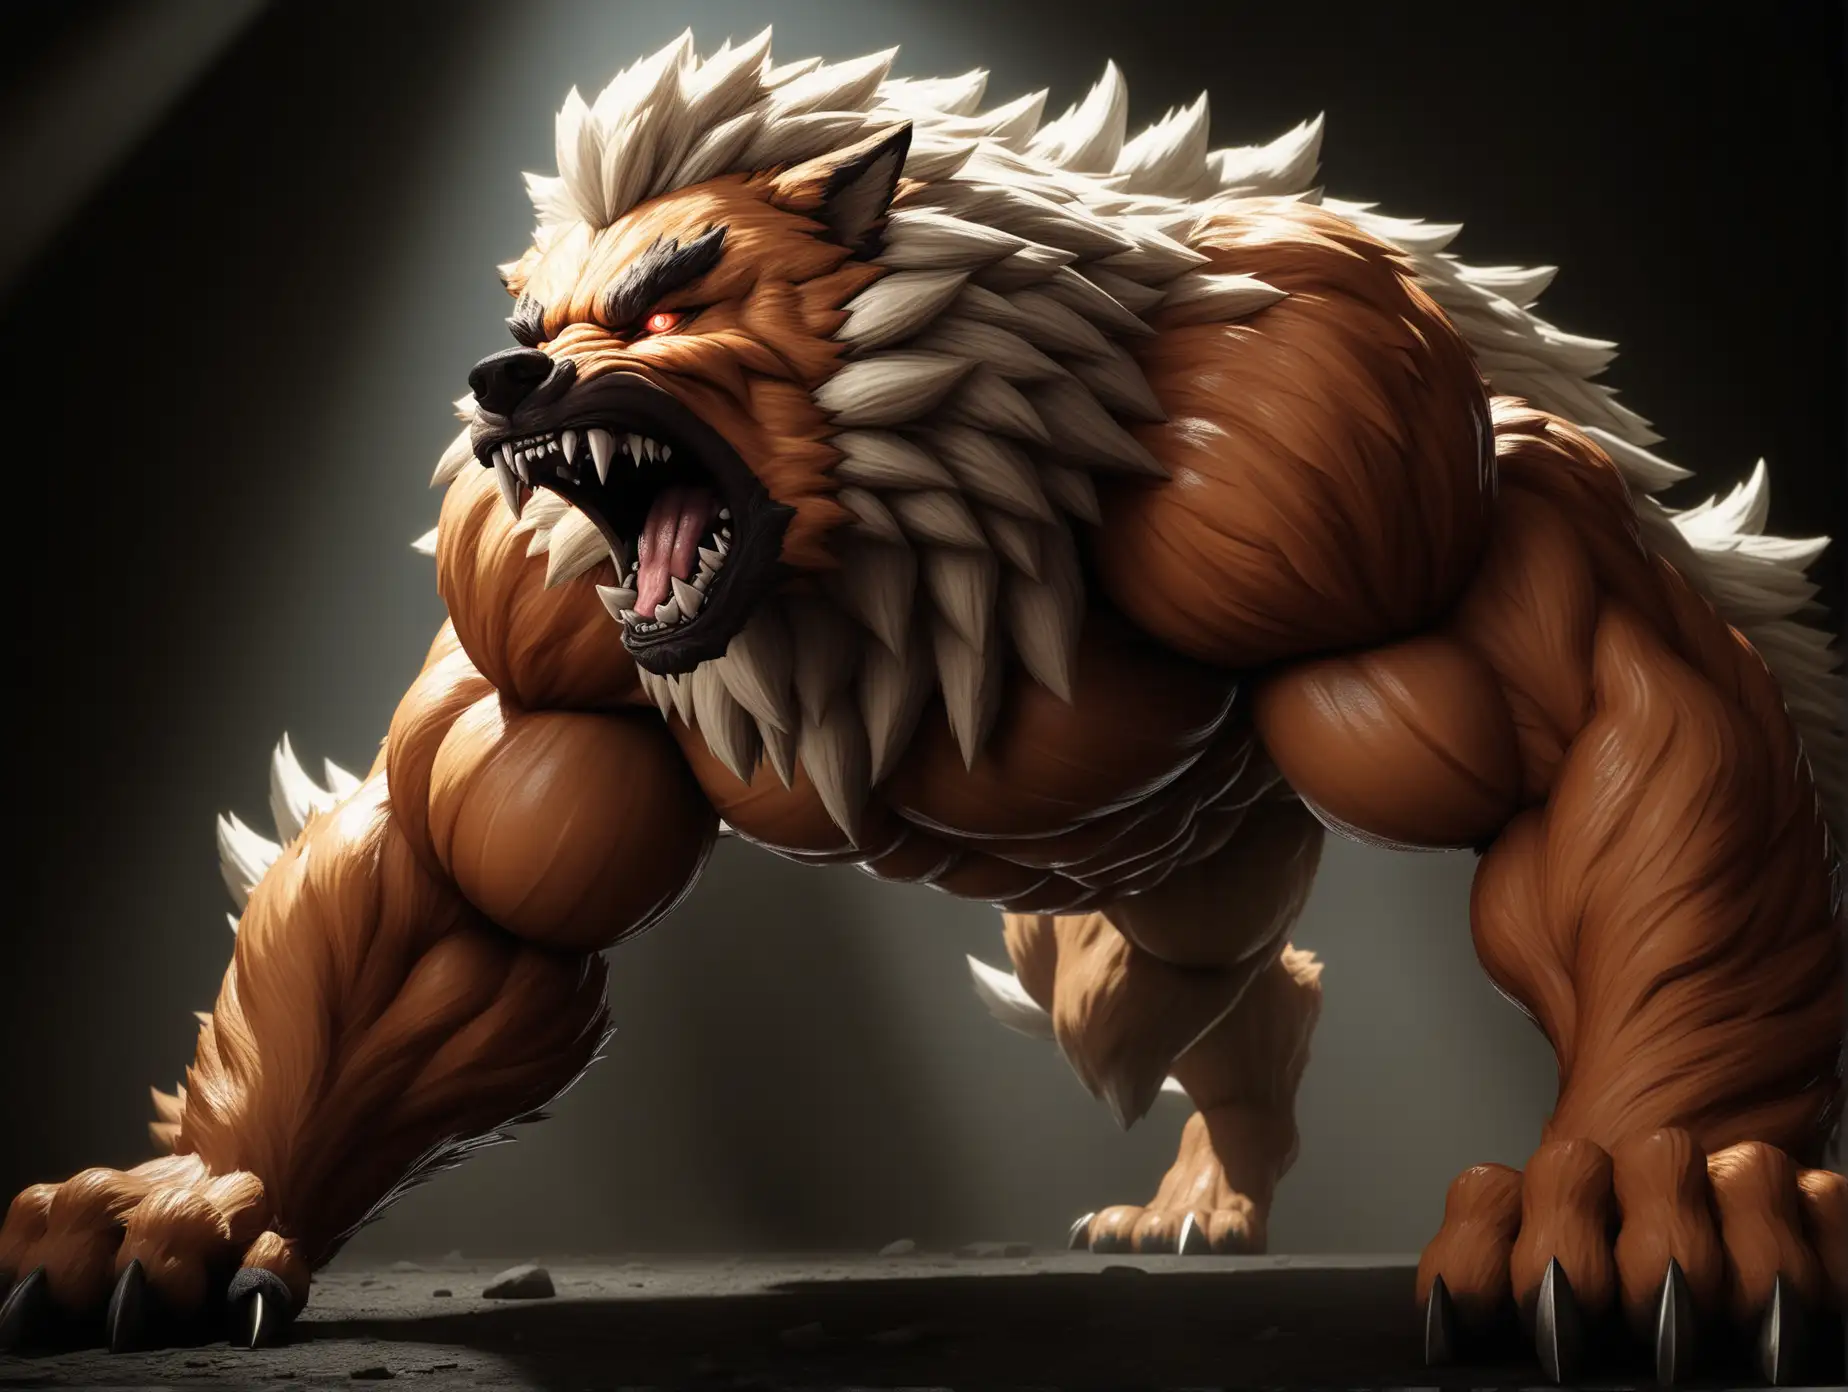 Majestic Arcanine Powerful Fox Dog with Muscular Build and Saber Tooth Fangs